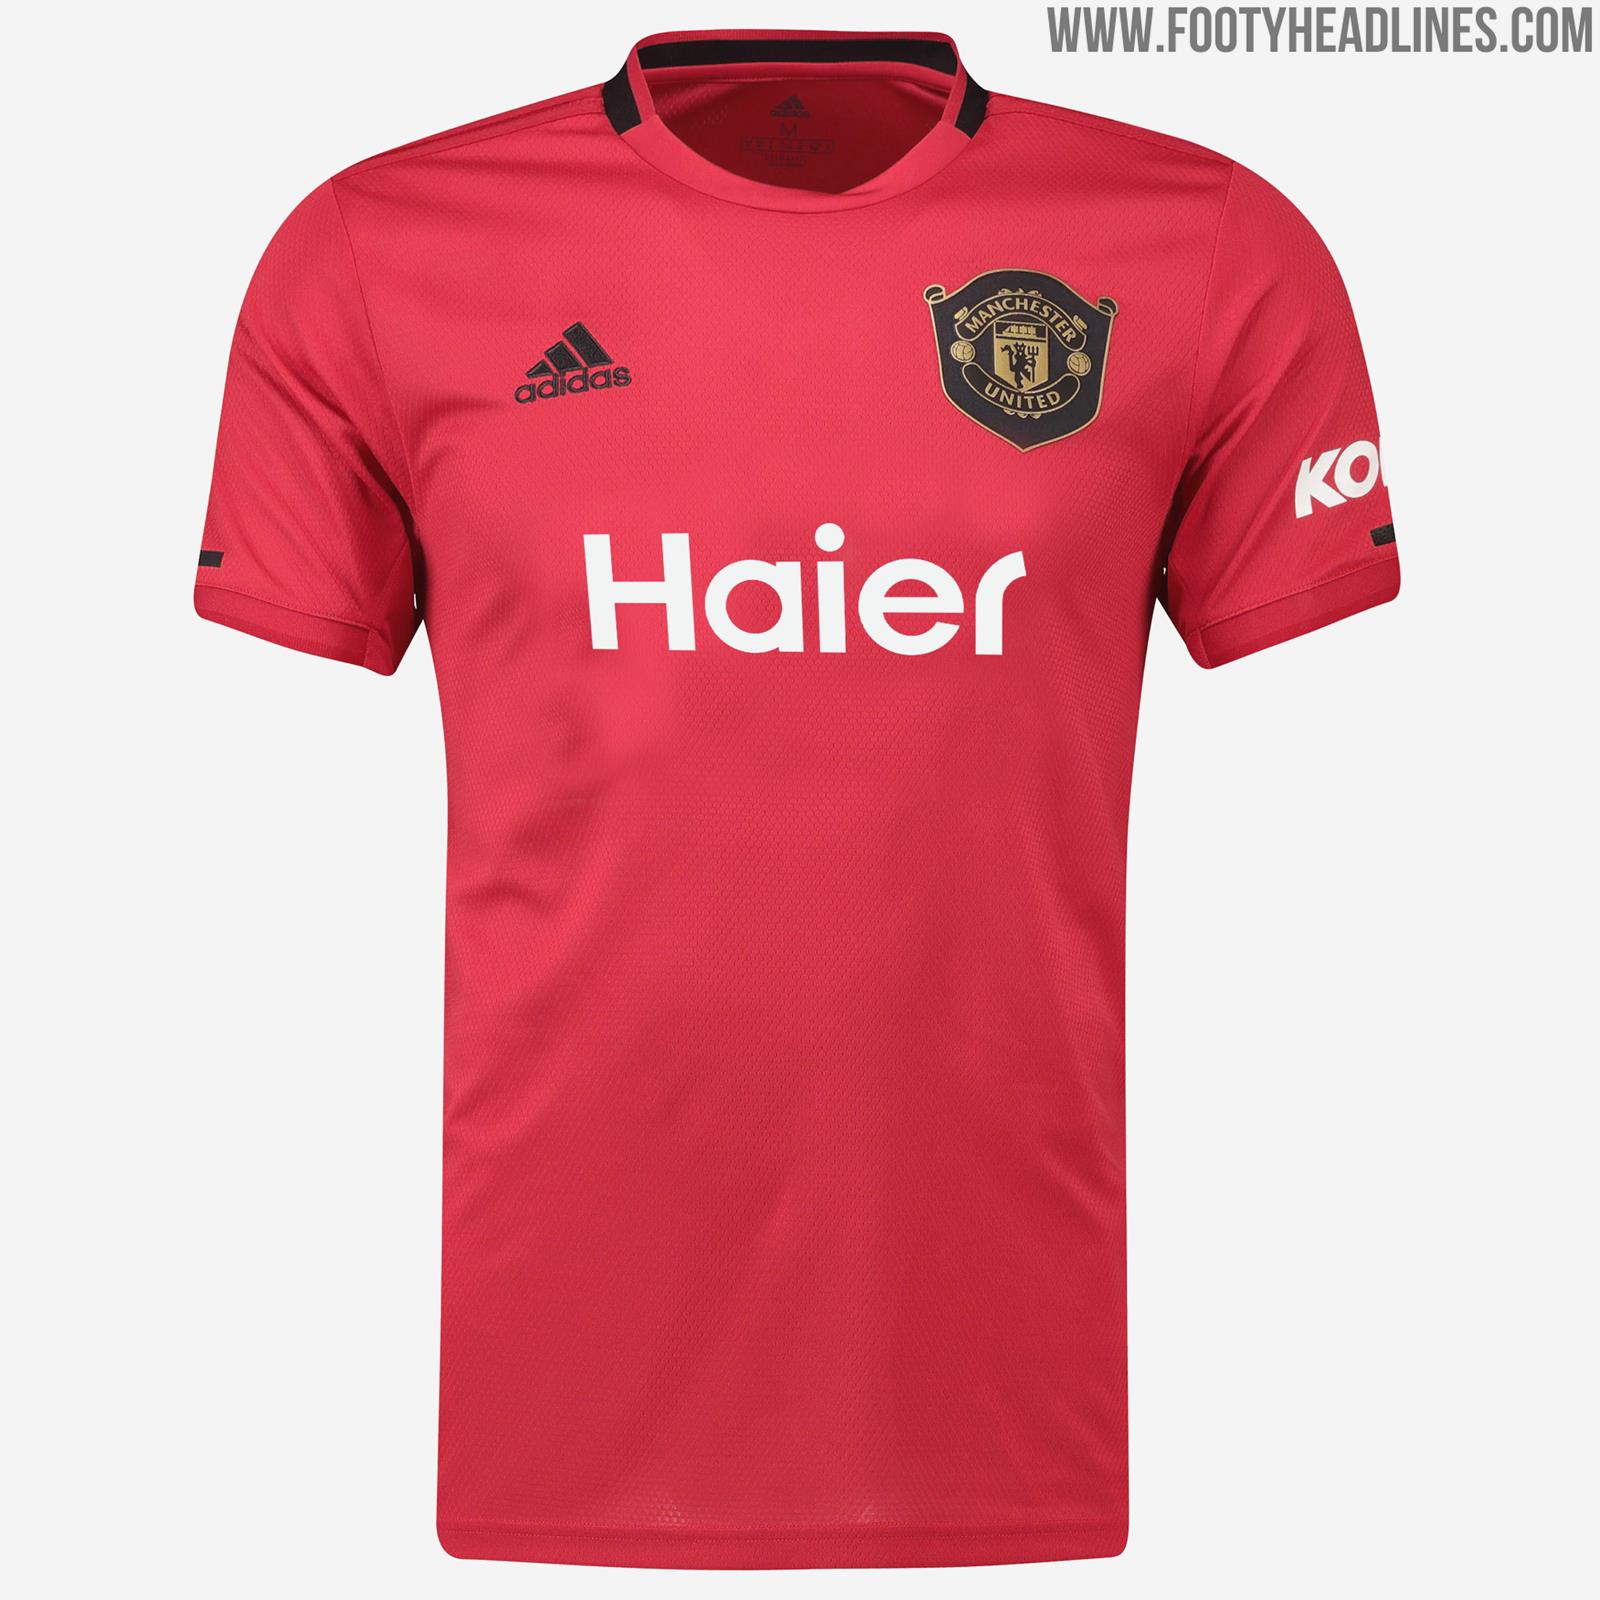 How The Manchester United Kit Could Have Looked Like With Possible New